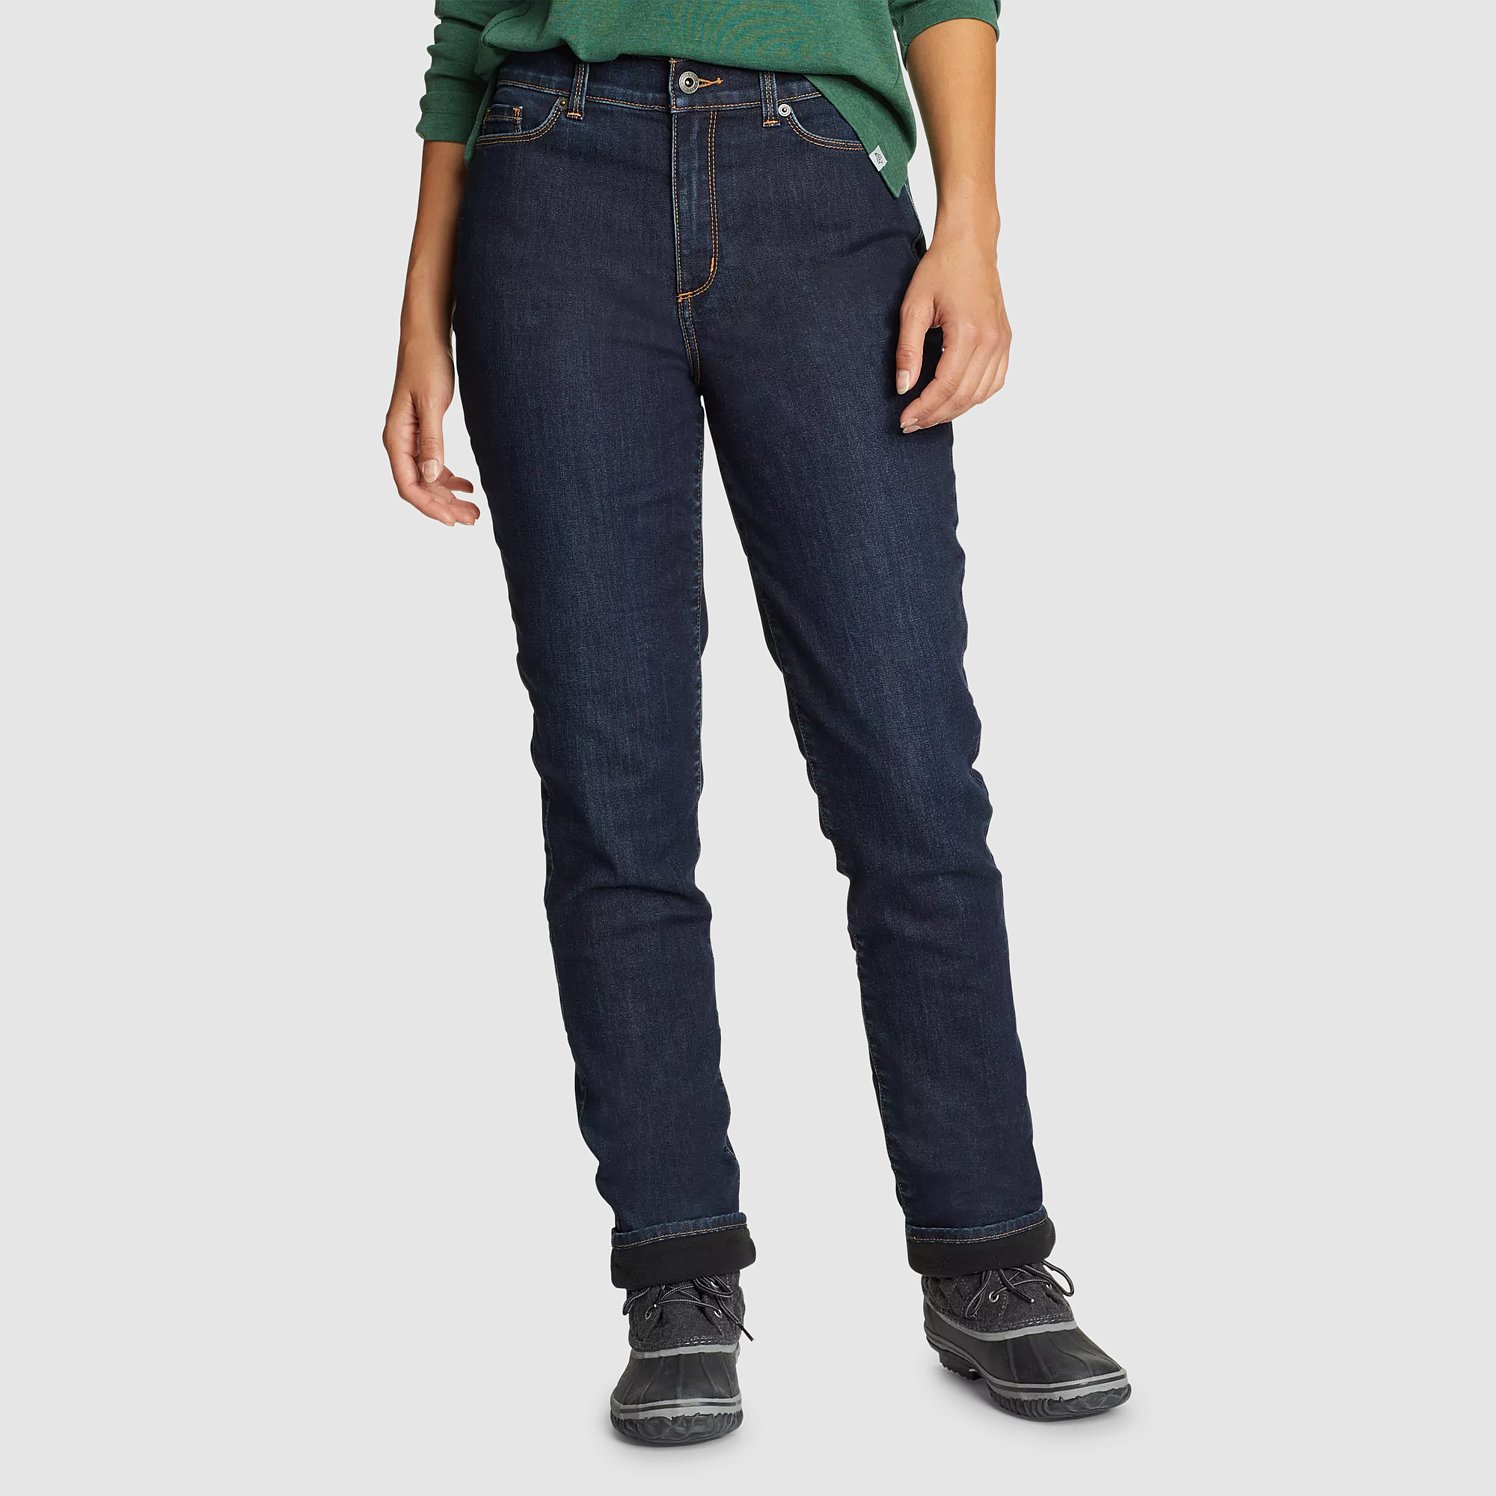 Women's Voyager Fleece-lined High-rise Jeans - Eddie Bauer